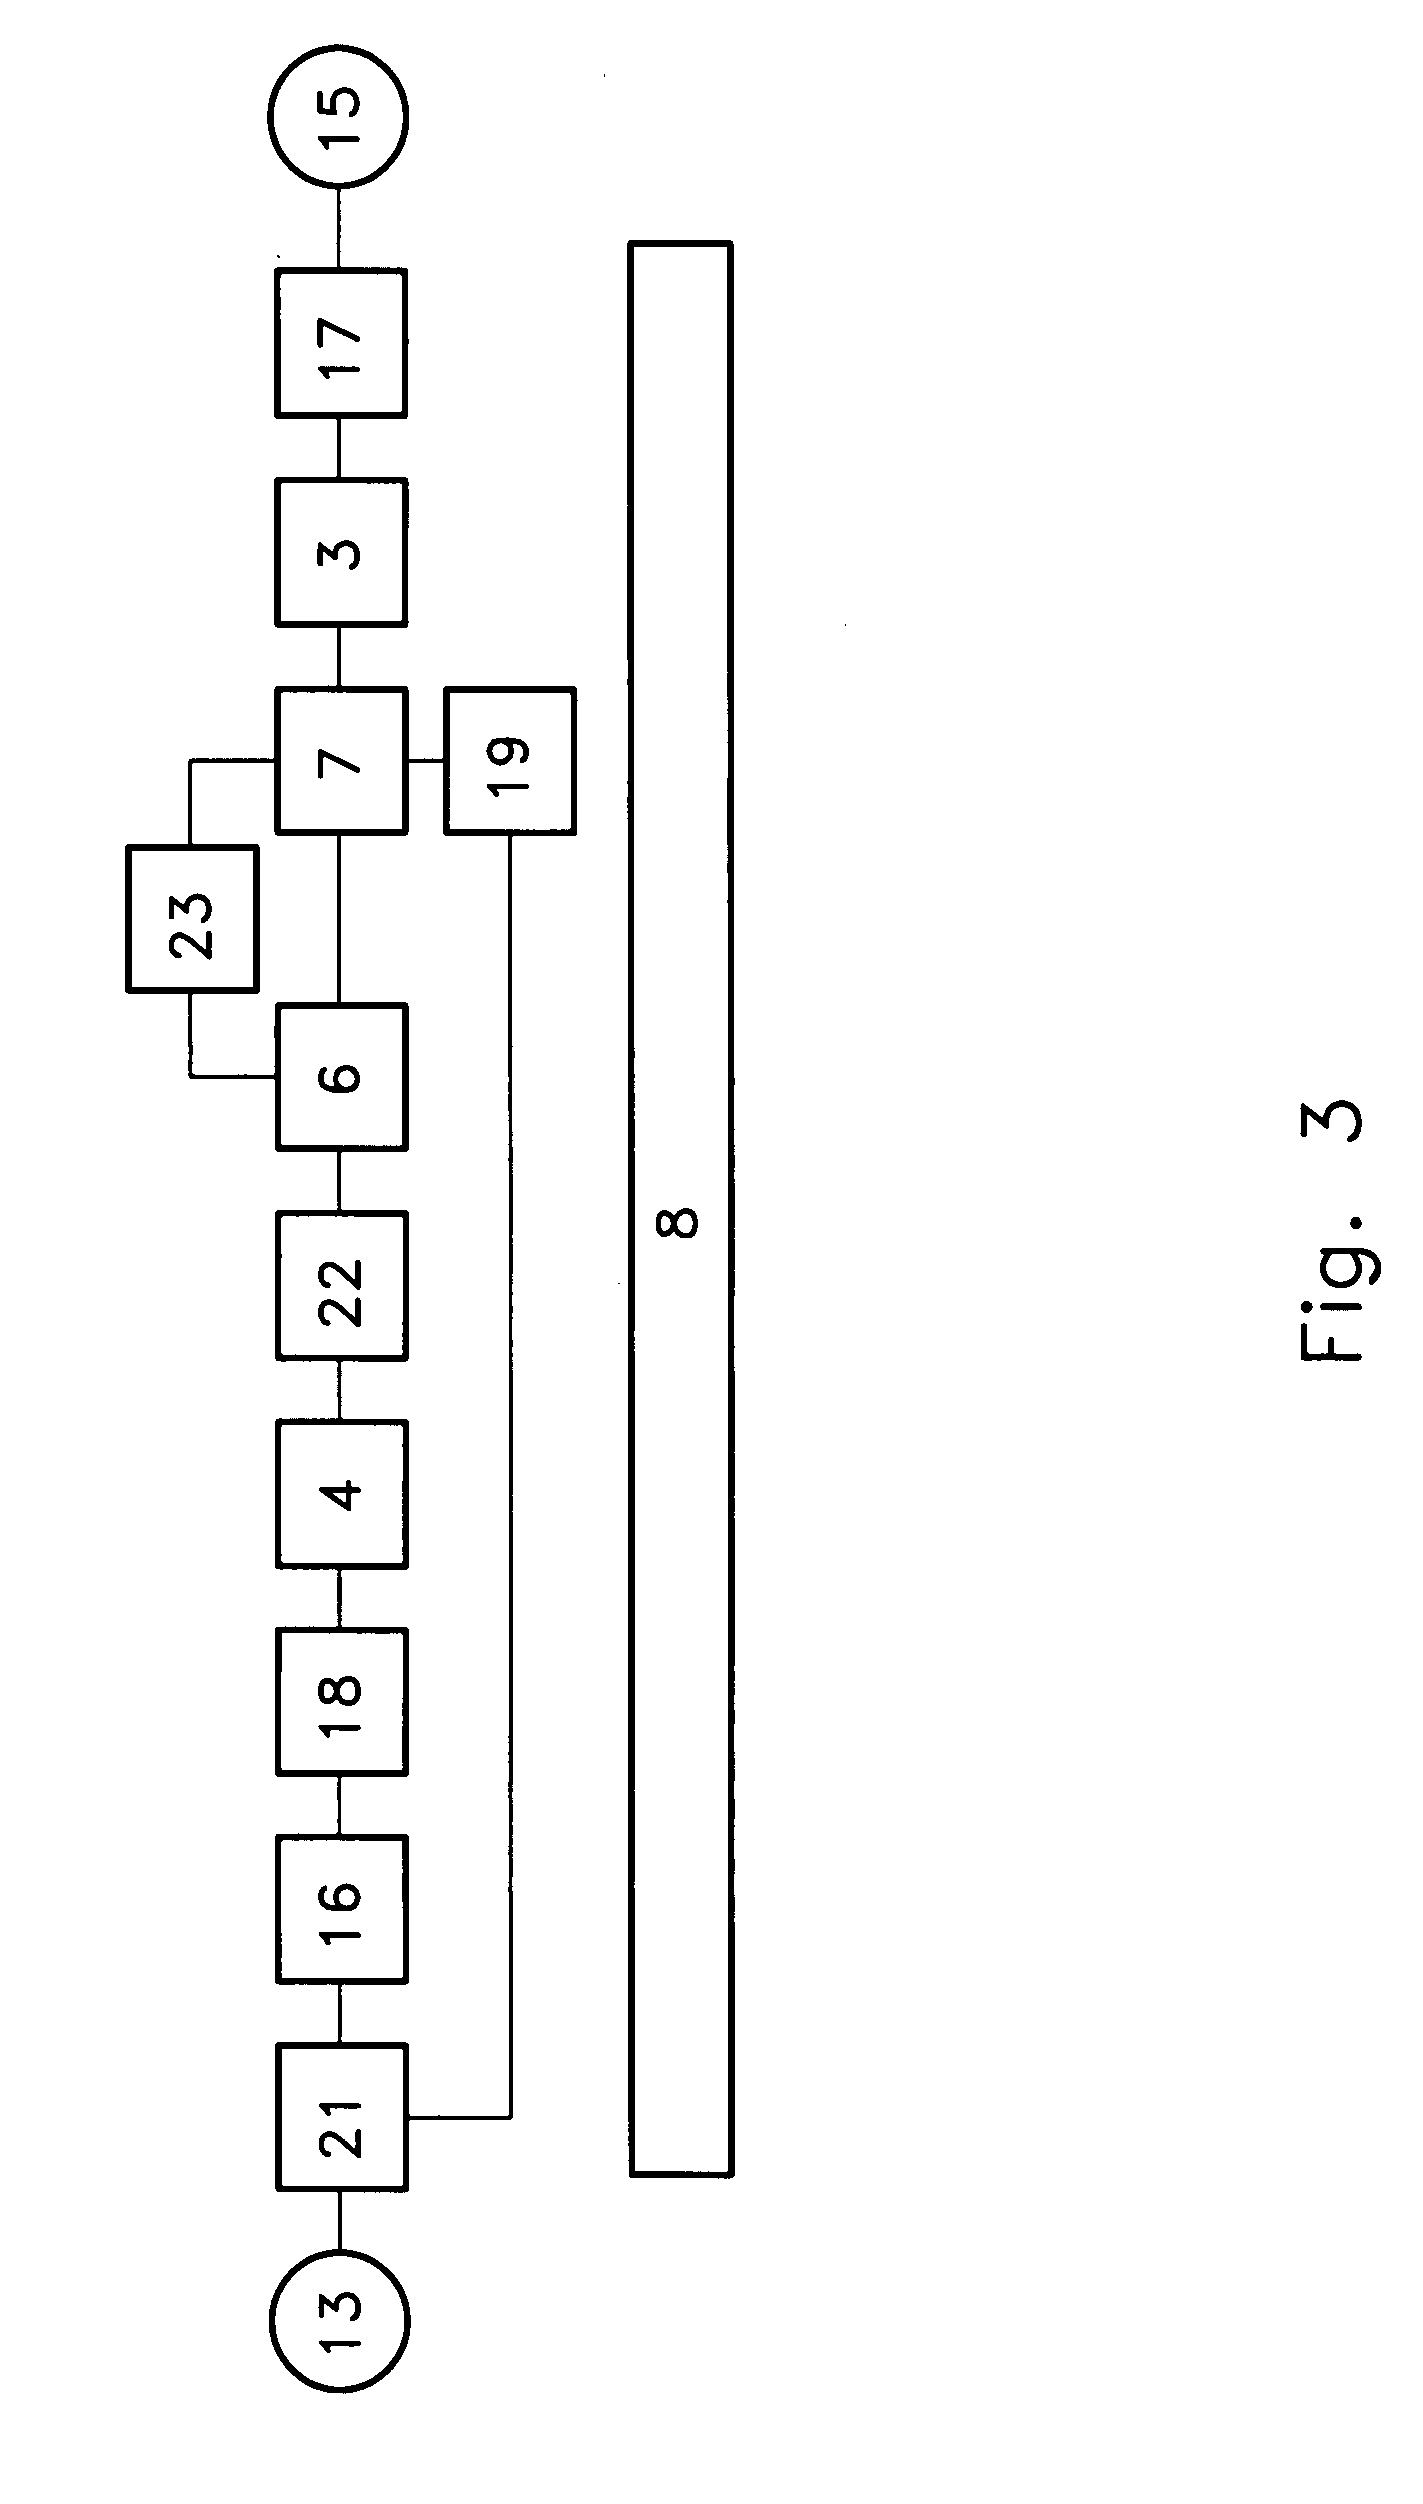 Methods and Apparatus for Maintaining Fresh Quality and Safe Food Attributes of Minimally Processed Produce